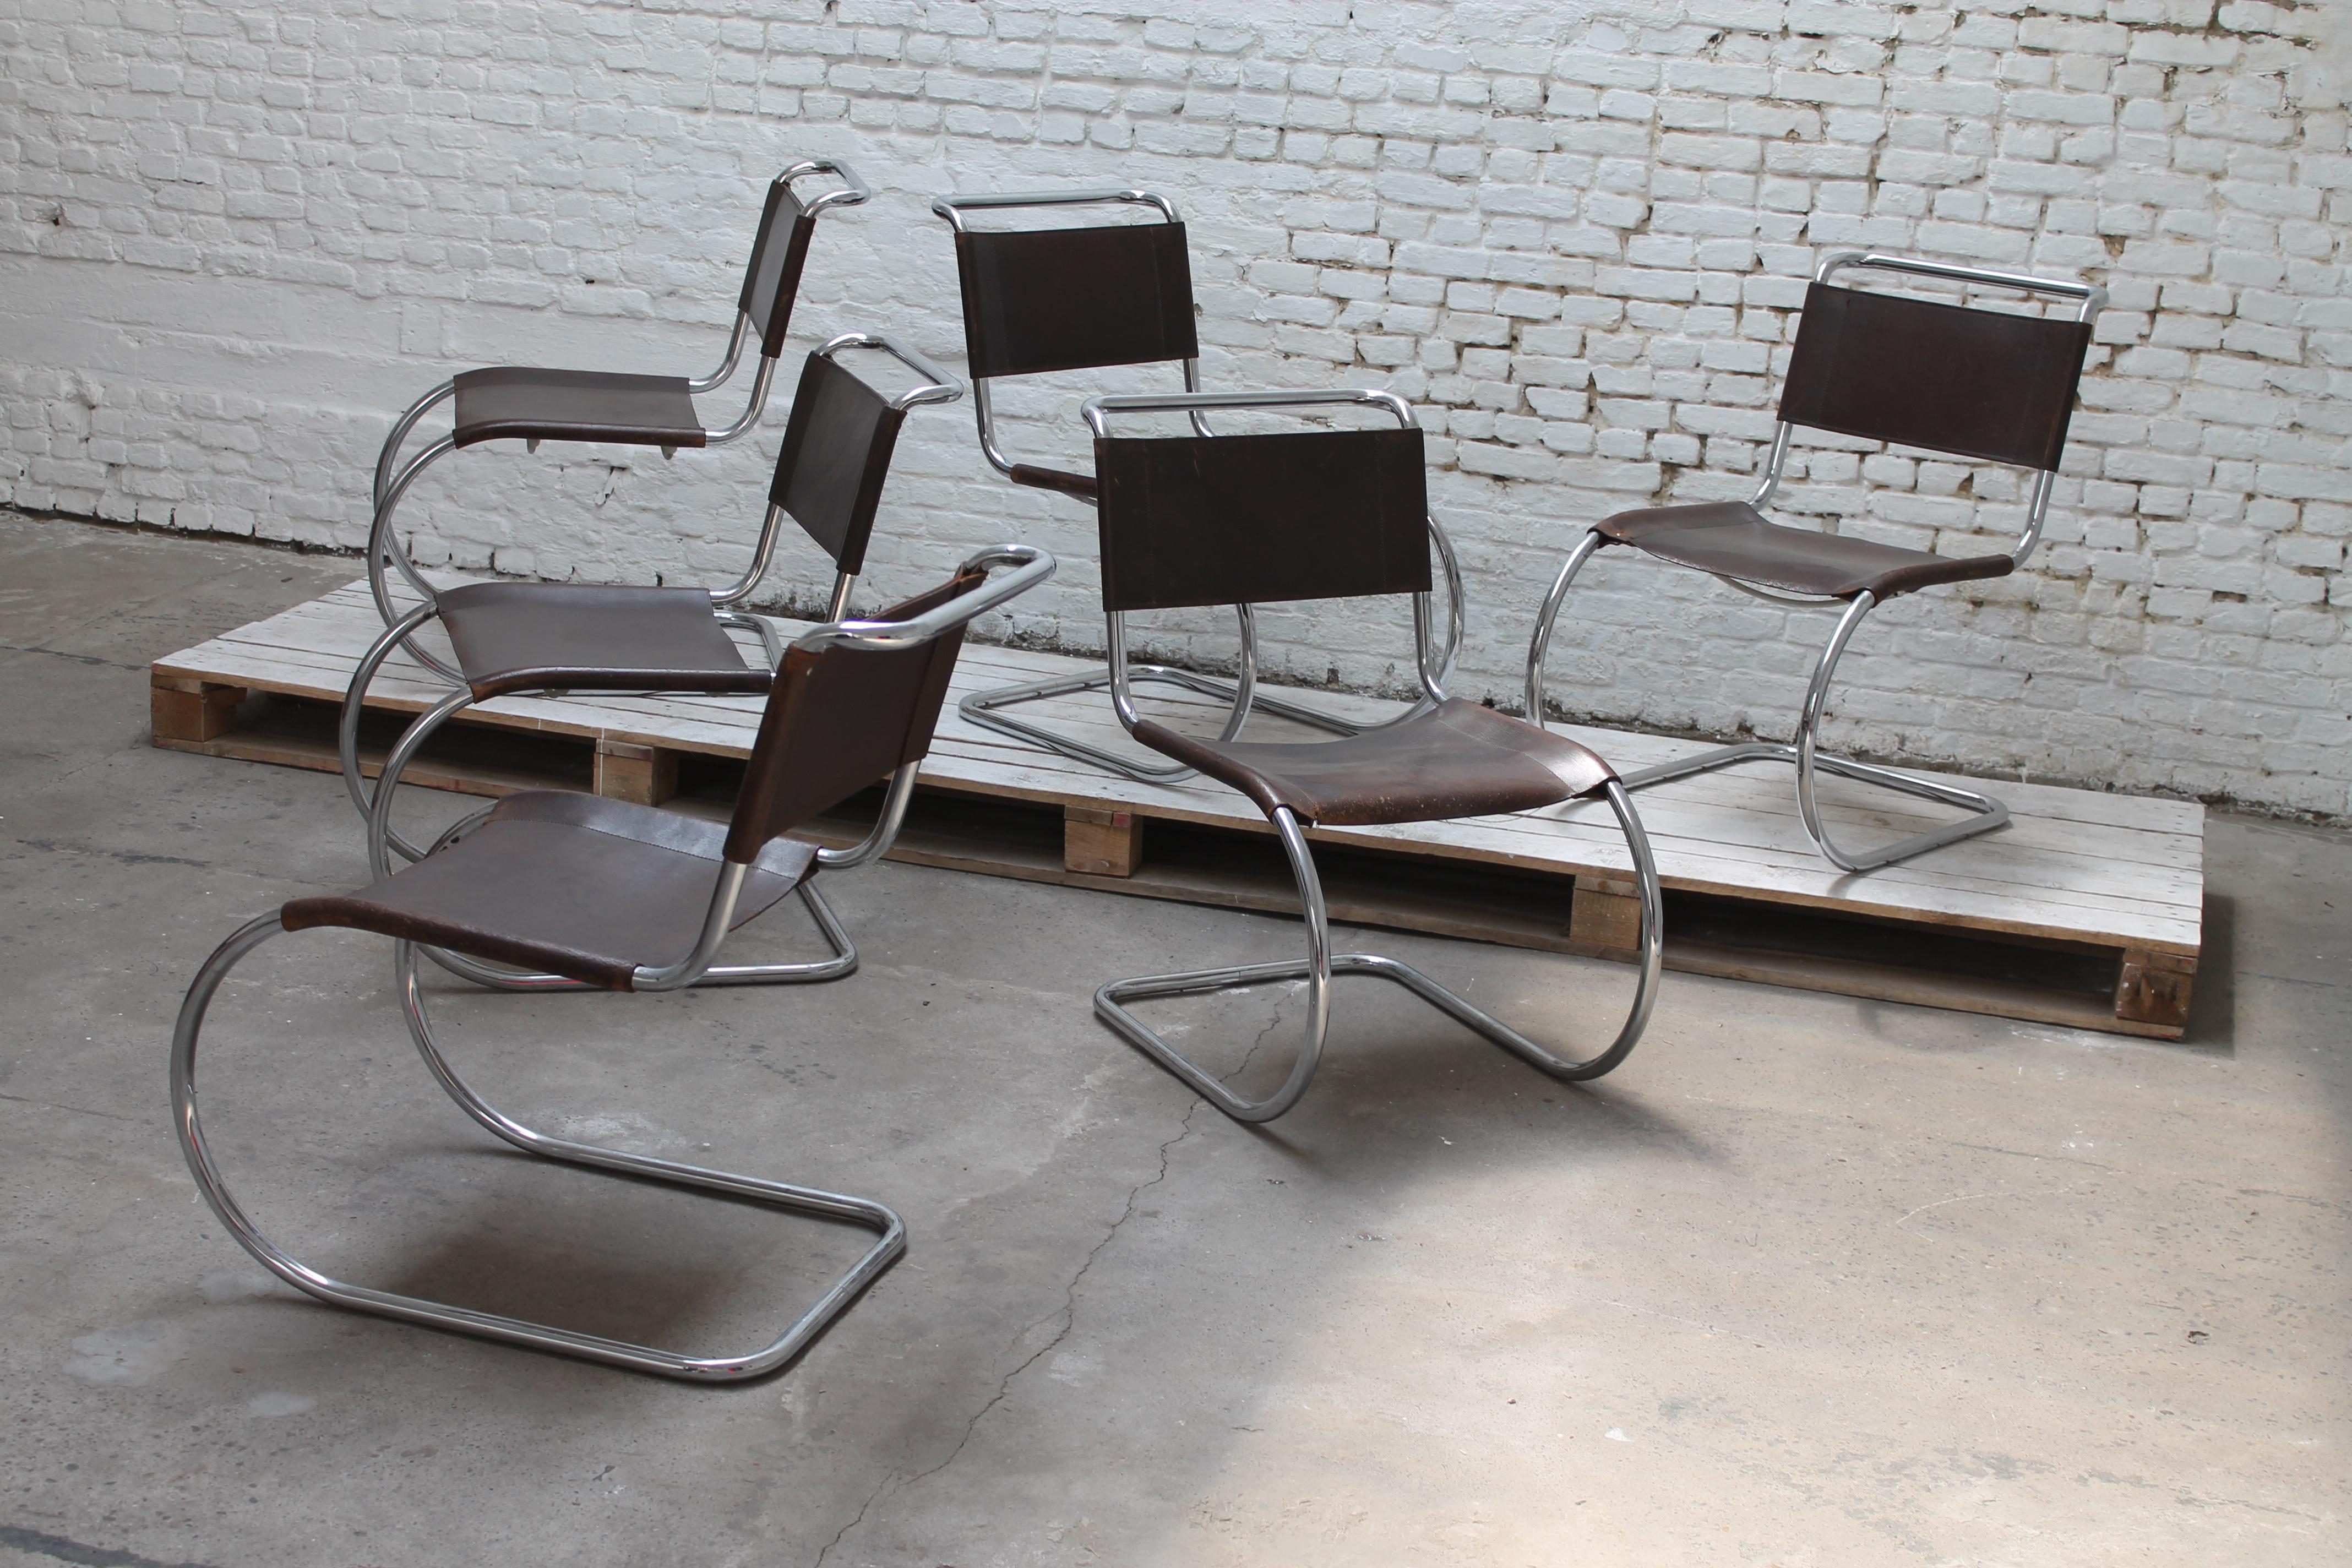 Six Mies Van De Rohe MR10 chairs in brown leather by Thonet, 1960.

Original 1960s set of six MR10 chairs in brown leather with Thonet label 
Great patina on the leather.
Some users wear.